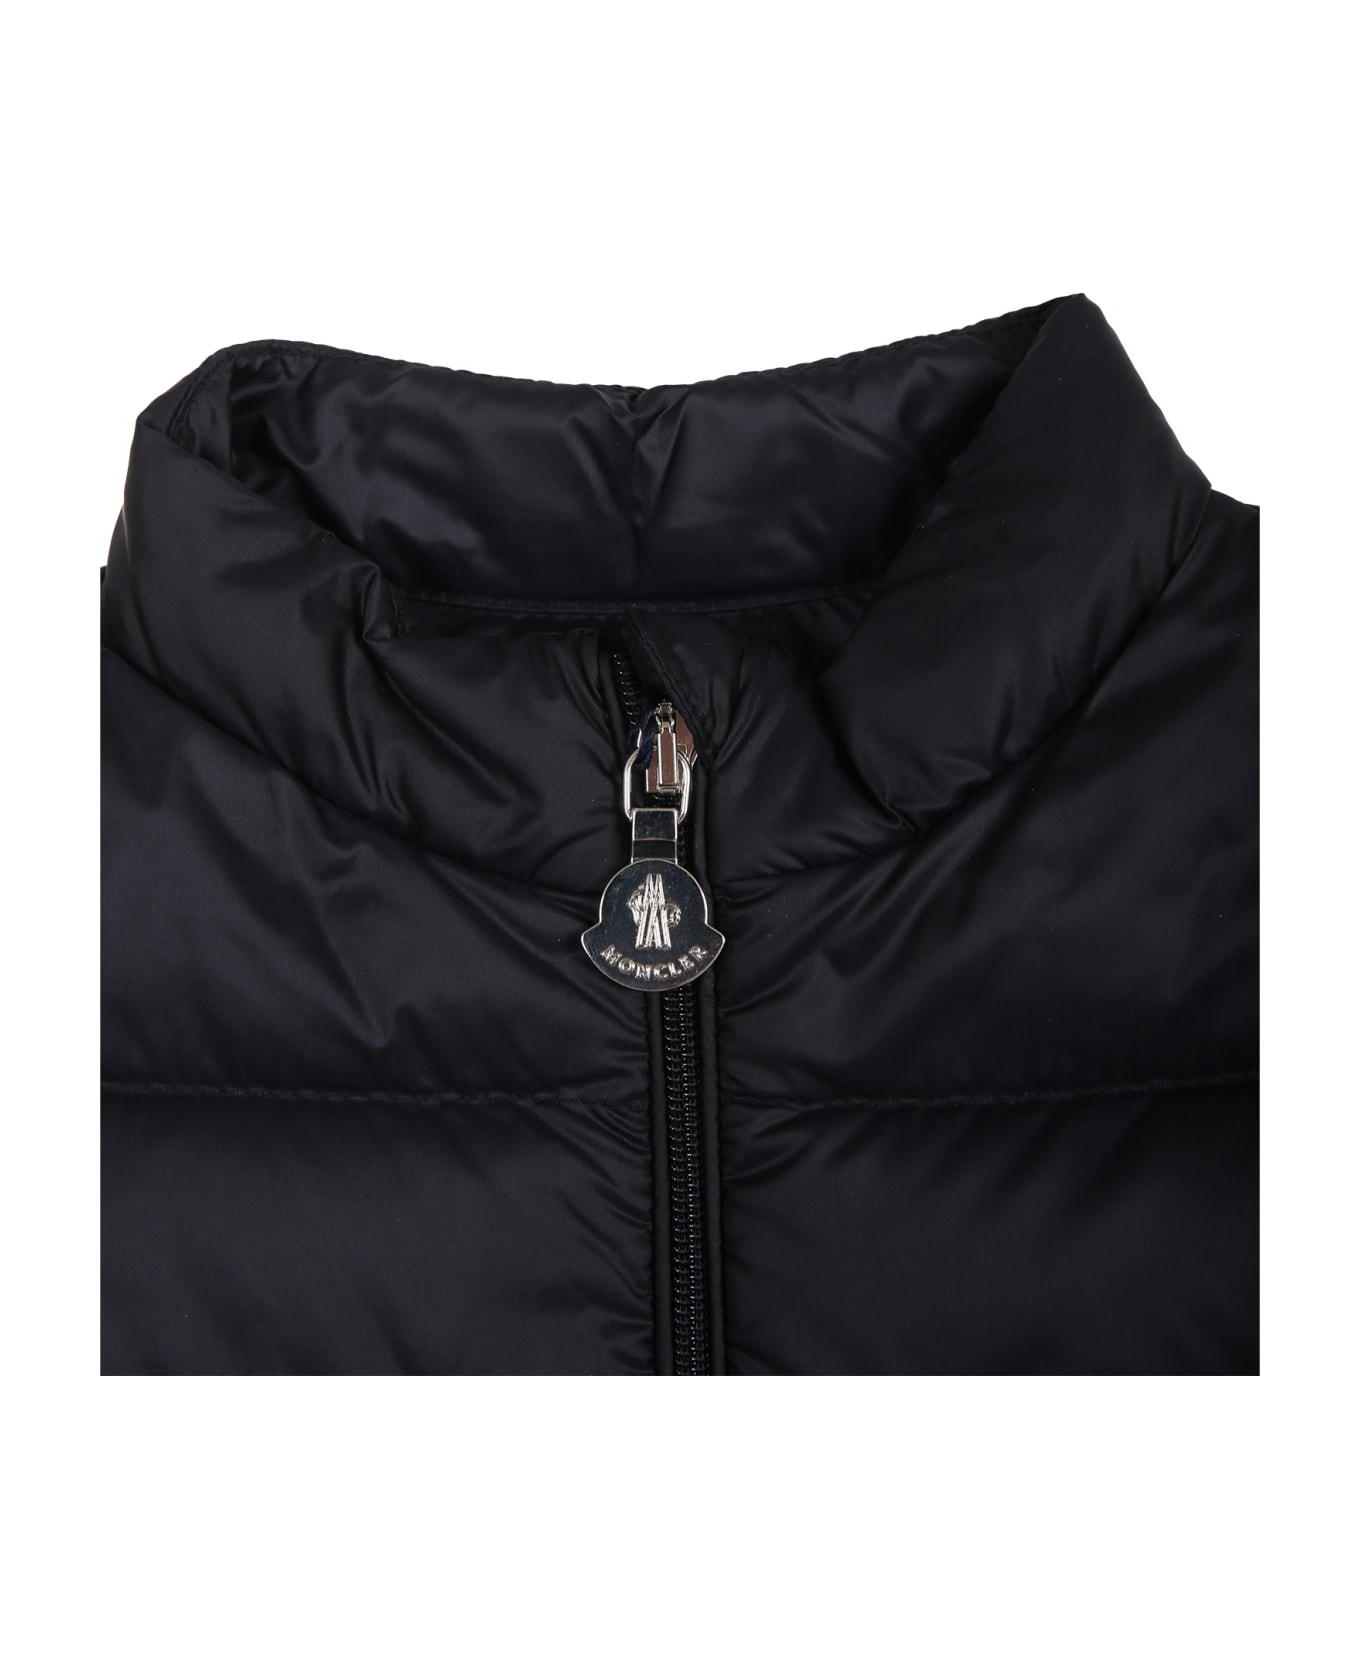 Moncler Down Jacket For Baby Girl With Logo - Blue